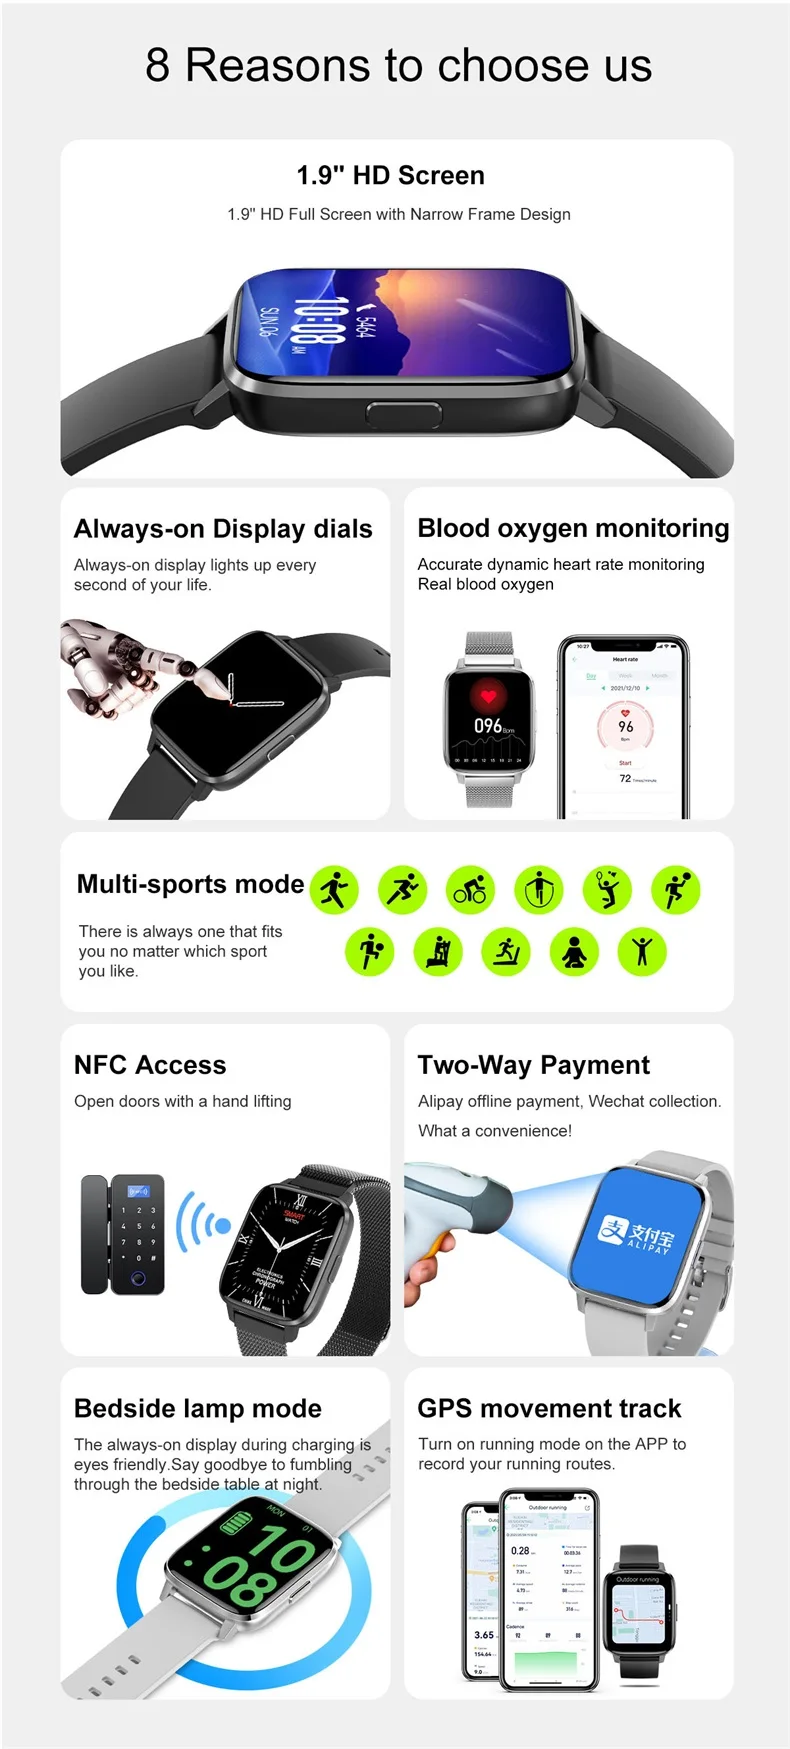 1.9 Inch Square Screen DTX Max Smart Watch Always-on Display Watch Face 500+ NFC Access Control Sports Watches Custom Dial Smartwatch (2).jpg